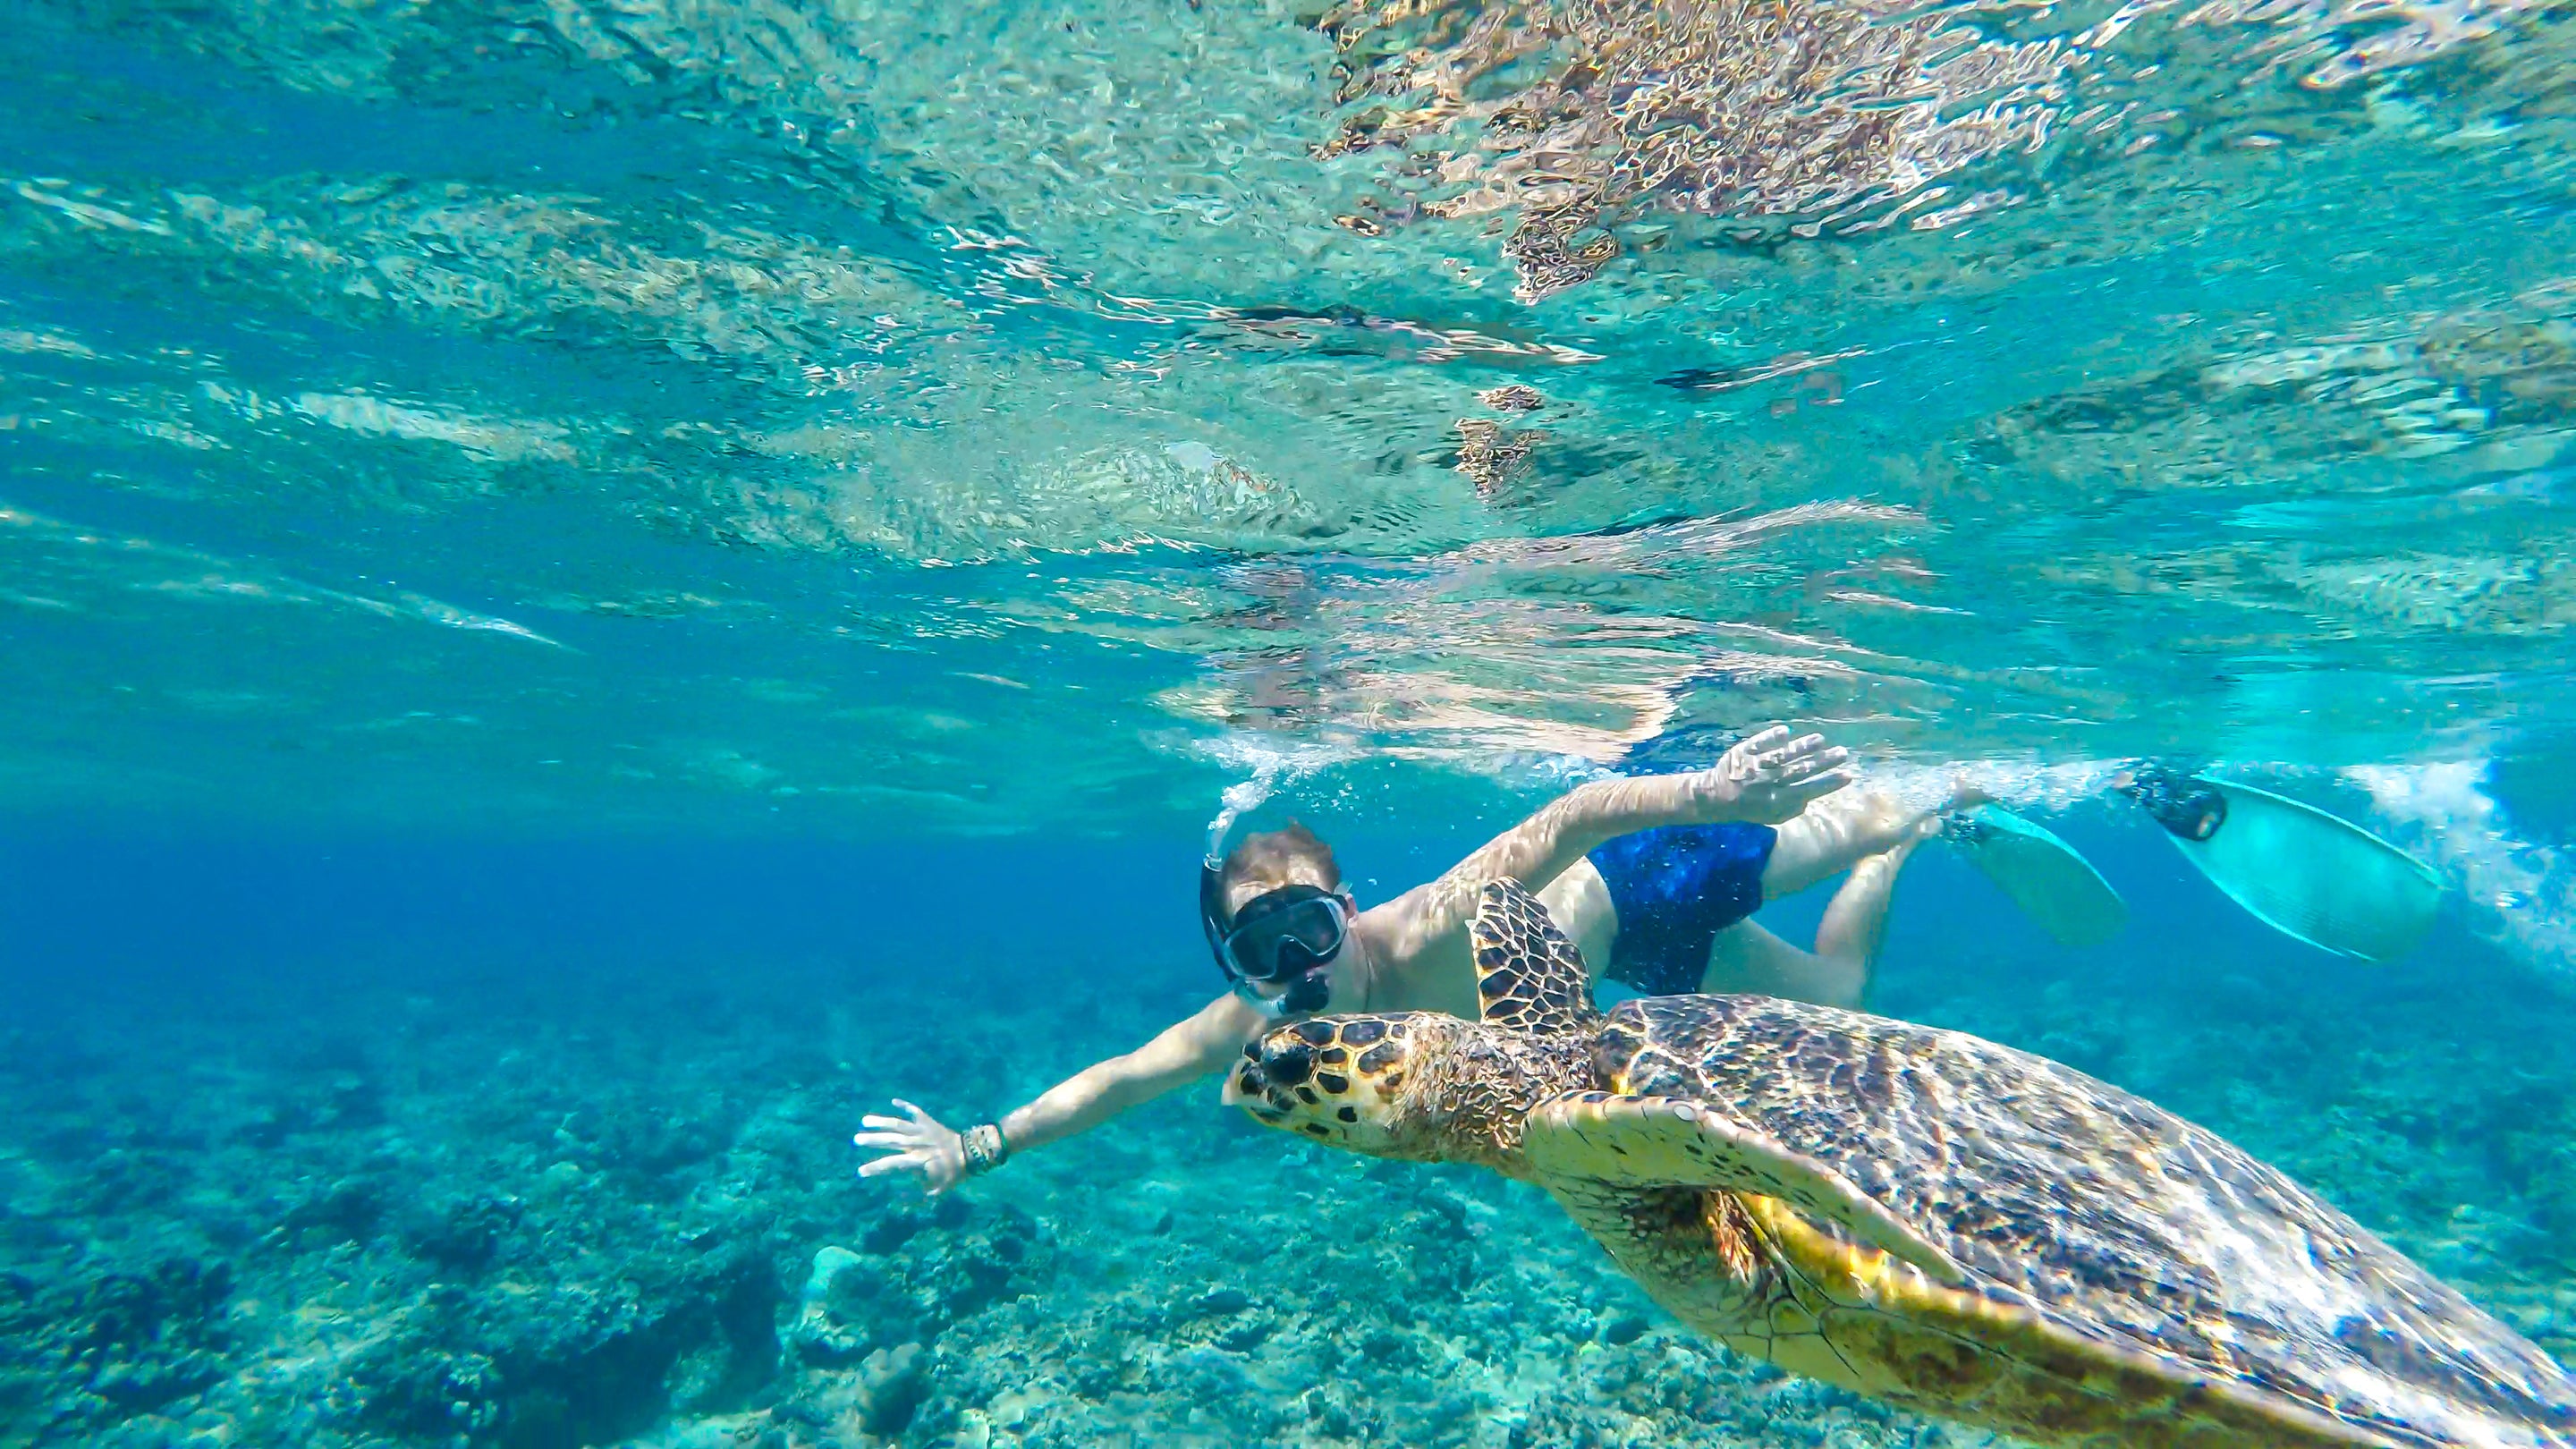 Book Snorkel and Dive Tours in Bali and Nusa Penida